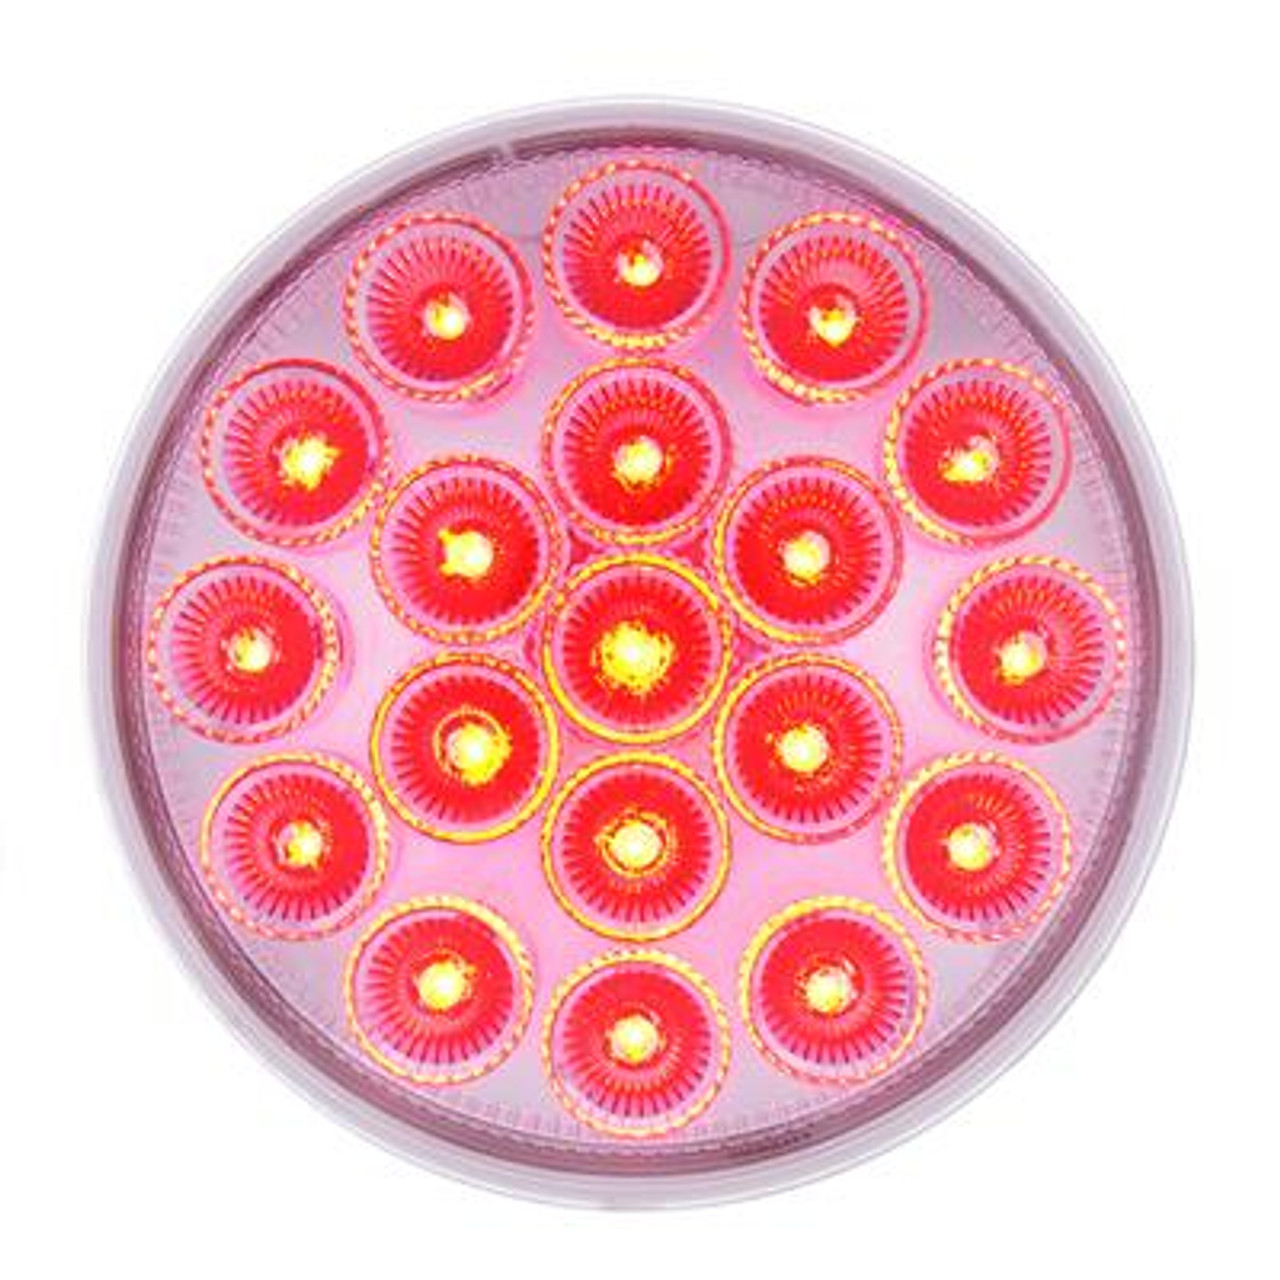 19 LED 4" Round Double Fury (Stop, Turn, Tail) With Warning Light - Red & Amber LED/Clear Lens